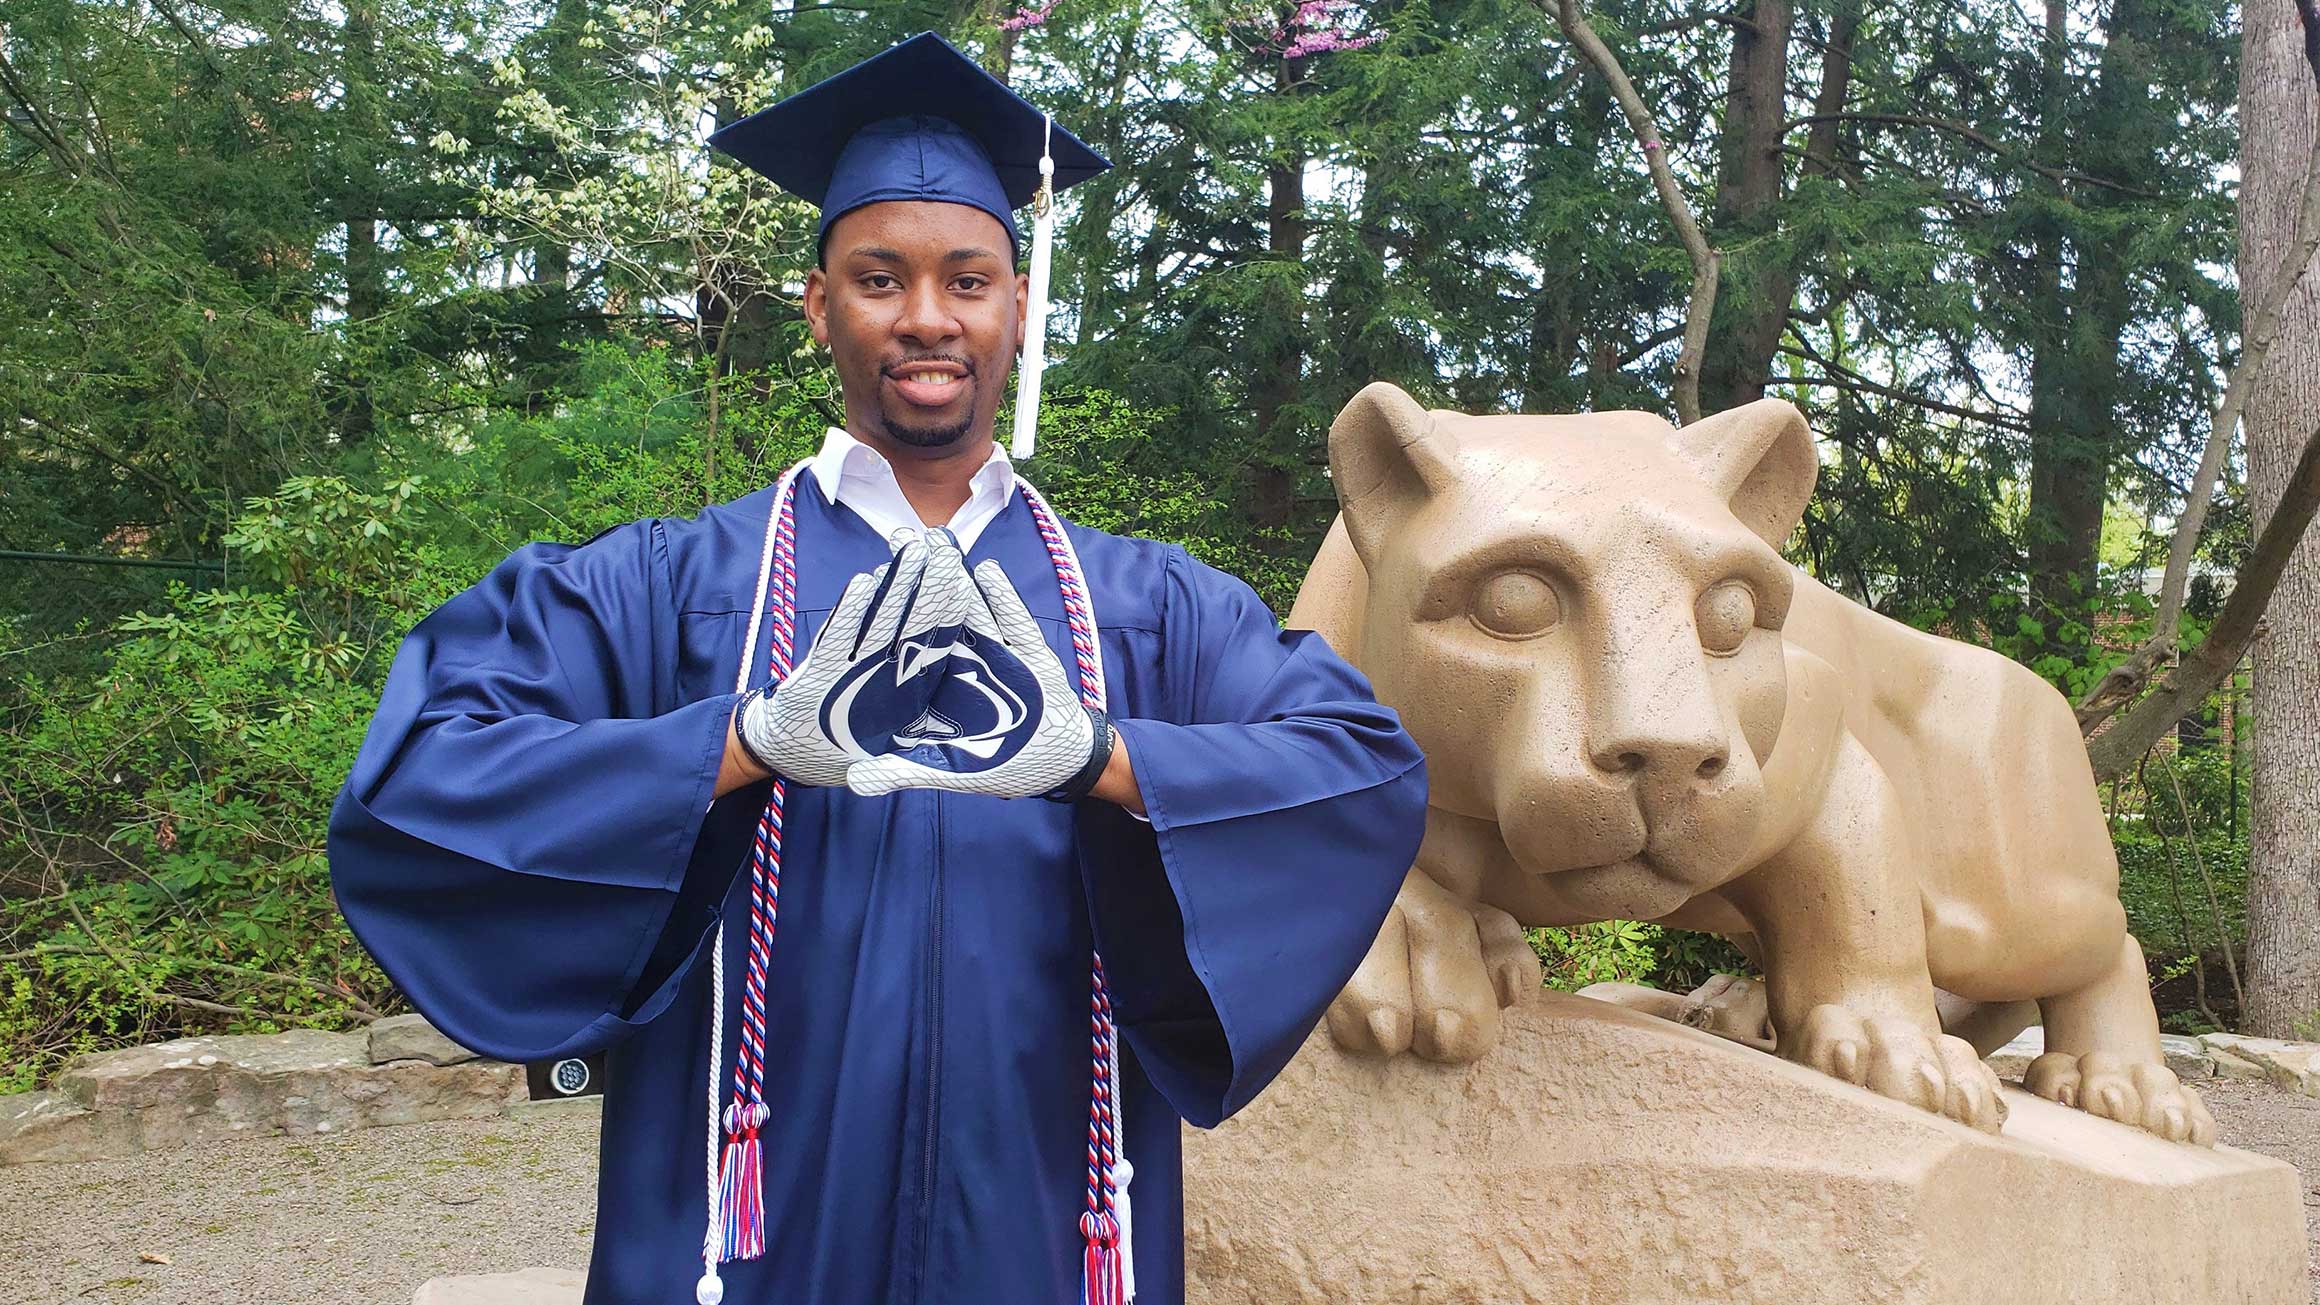 A student named James Elder wears his cap and gown in front of the Nittany Lion statue.